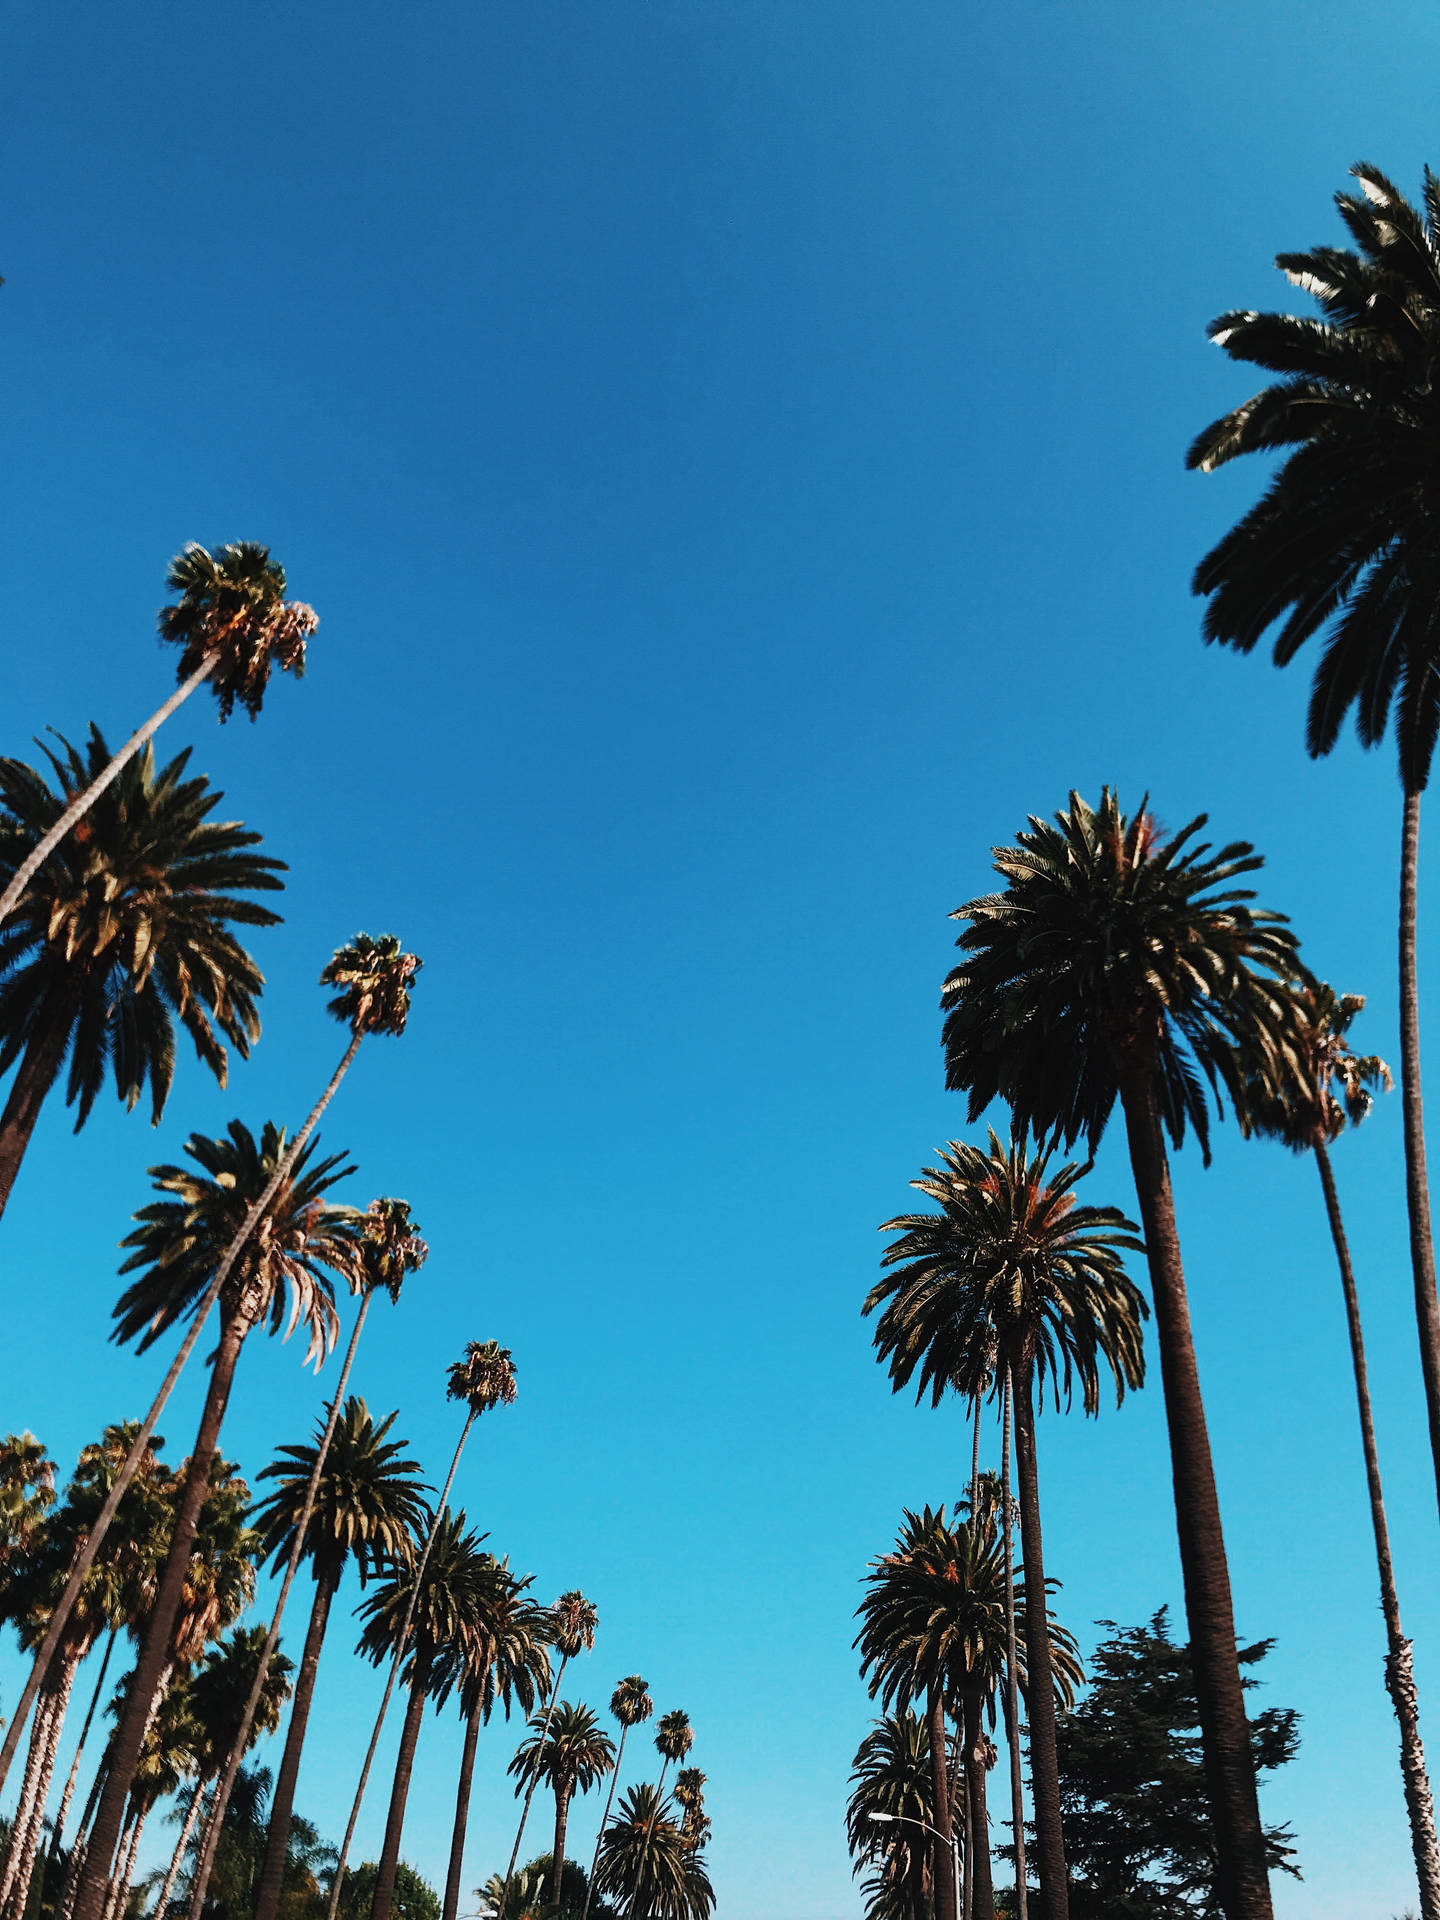 Iphone California Palm Trees And Blue Sky Wallpaper